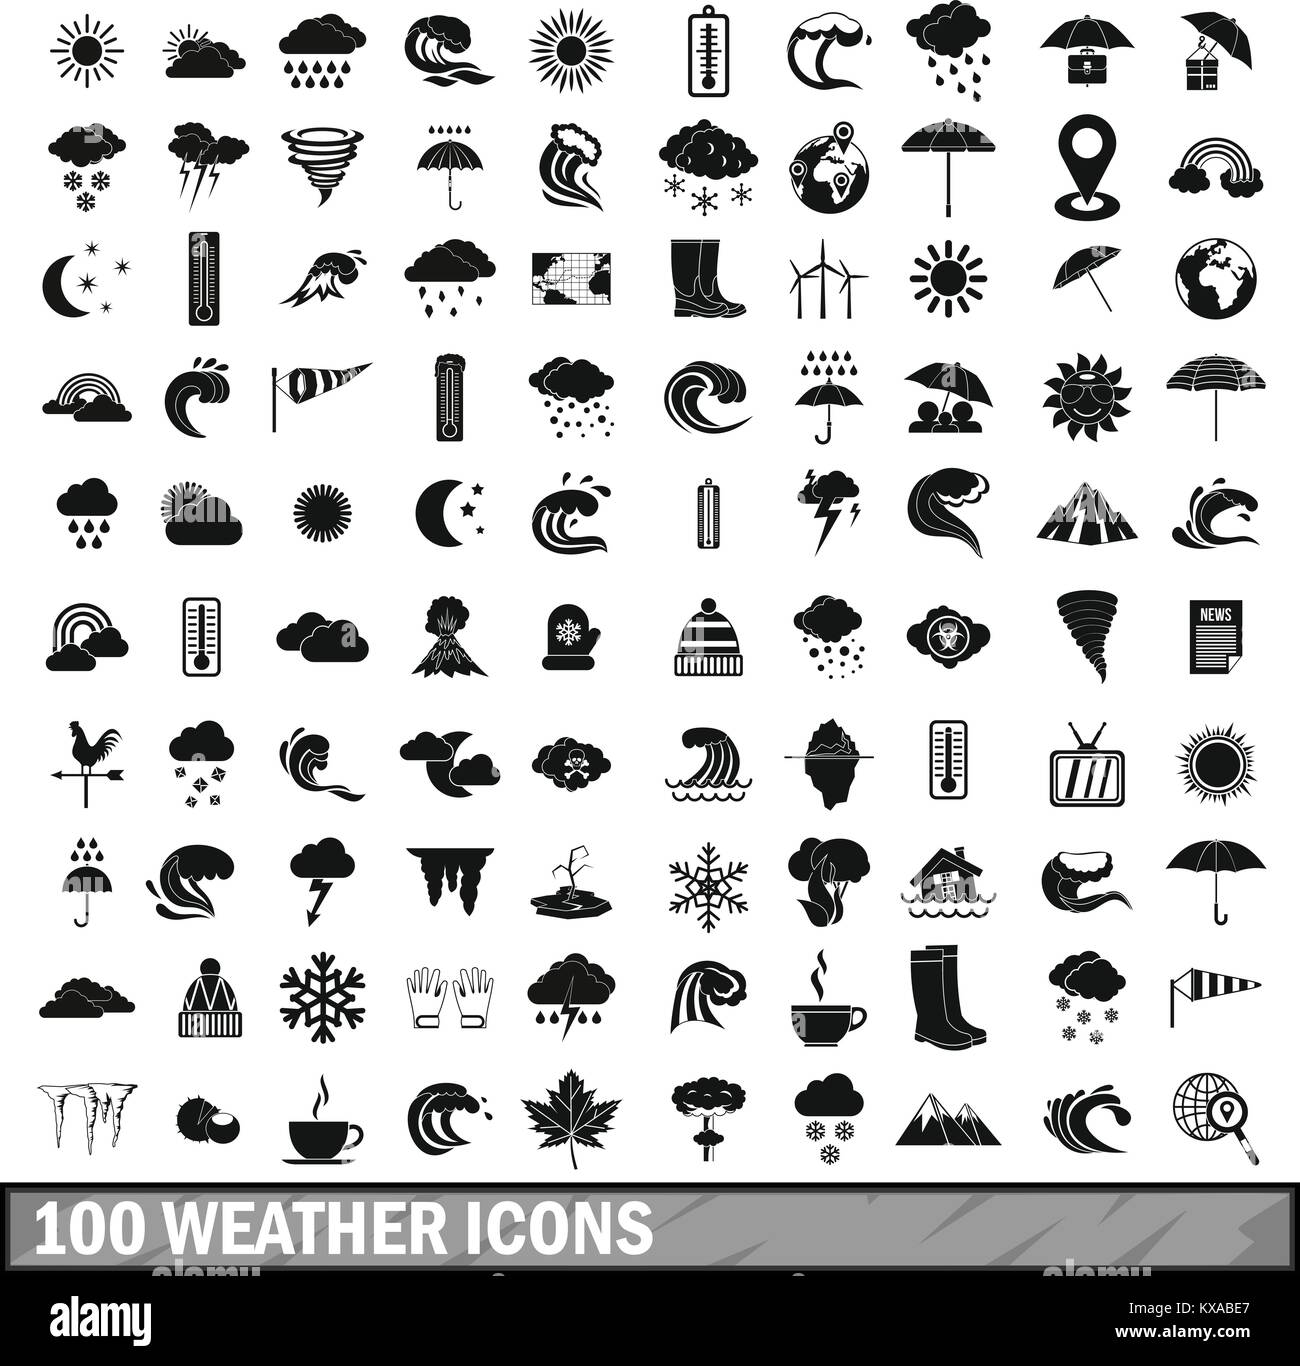 100 weather icons set in simple style Stock Vector